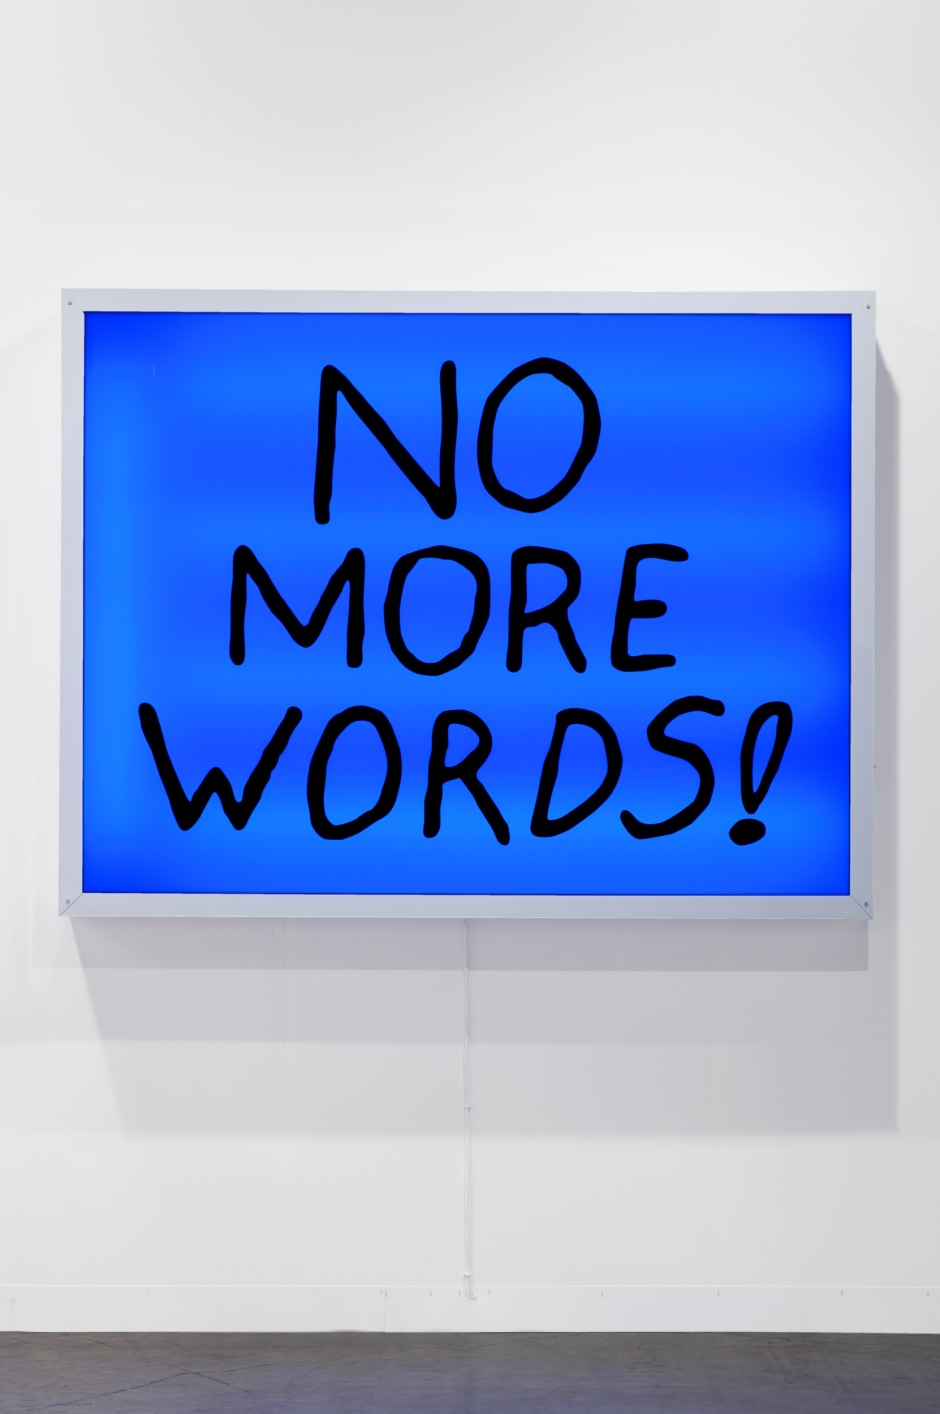 No More Words, 2013  lightbox  137.2 x 177.8 cm 54 x 70 in.